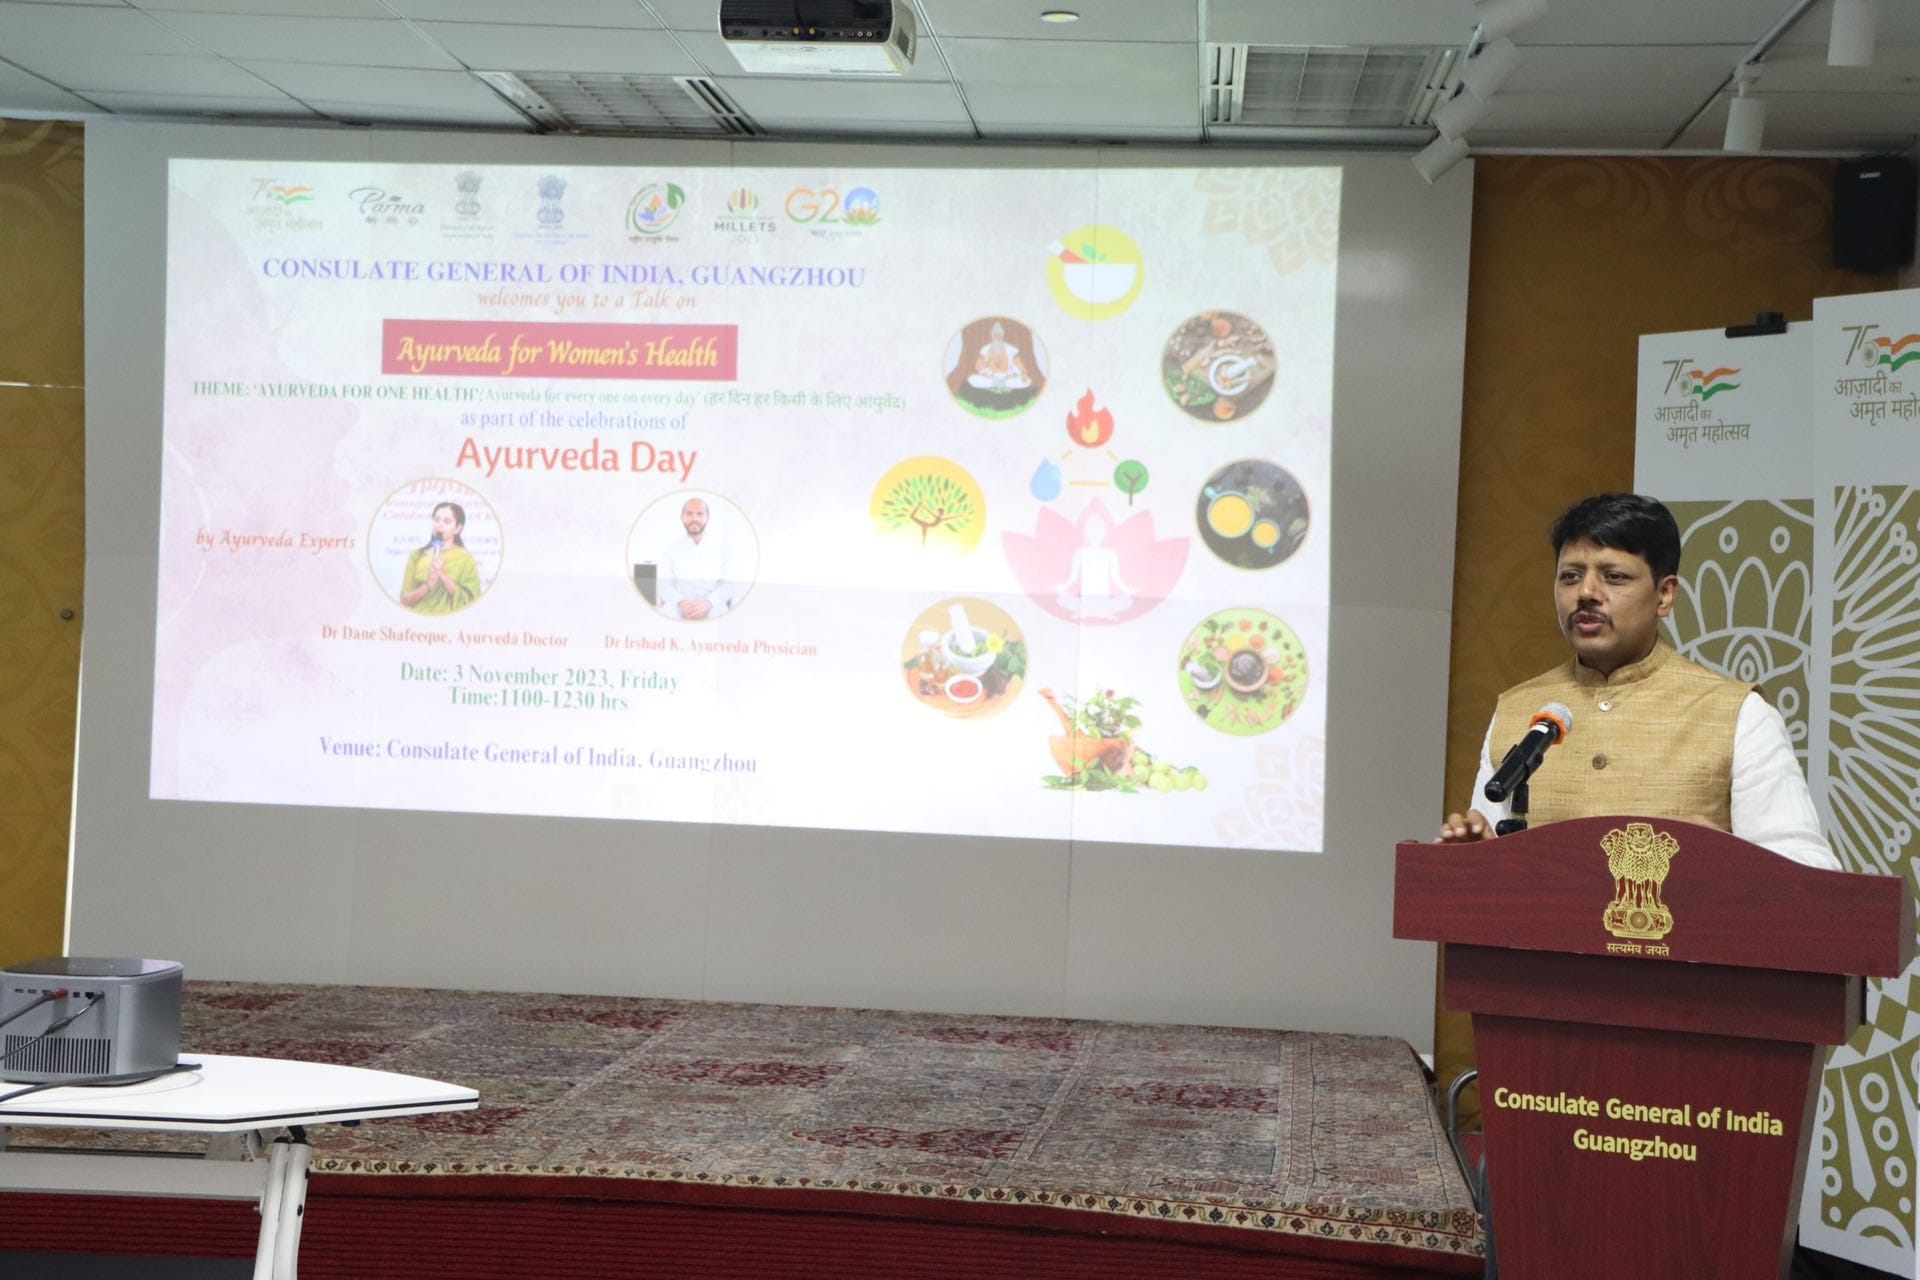 Consulate General of India, Guangzhou organized a special event on ‘Ayurveda for Women’s Health’ as part of the celebrations of Ayurveda Day on 3 November 2023. Ayurveda Experts from India Dr Irshad K. and Dr. Dane Shafeeque conducted the lecture, followed by an interactive session with the participants.